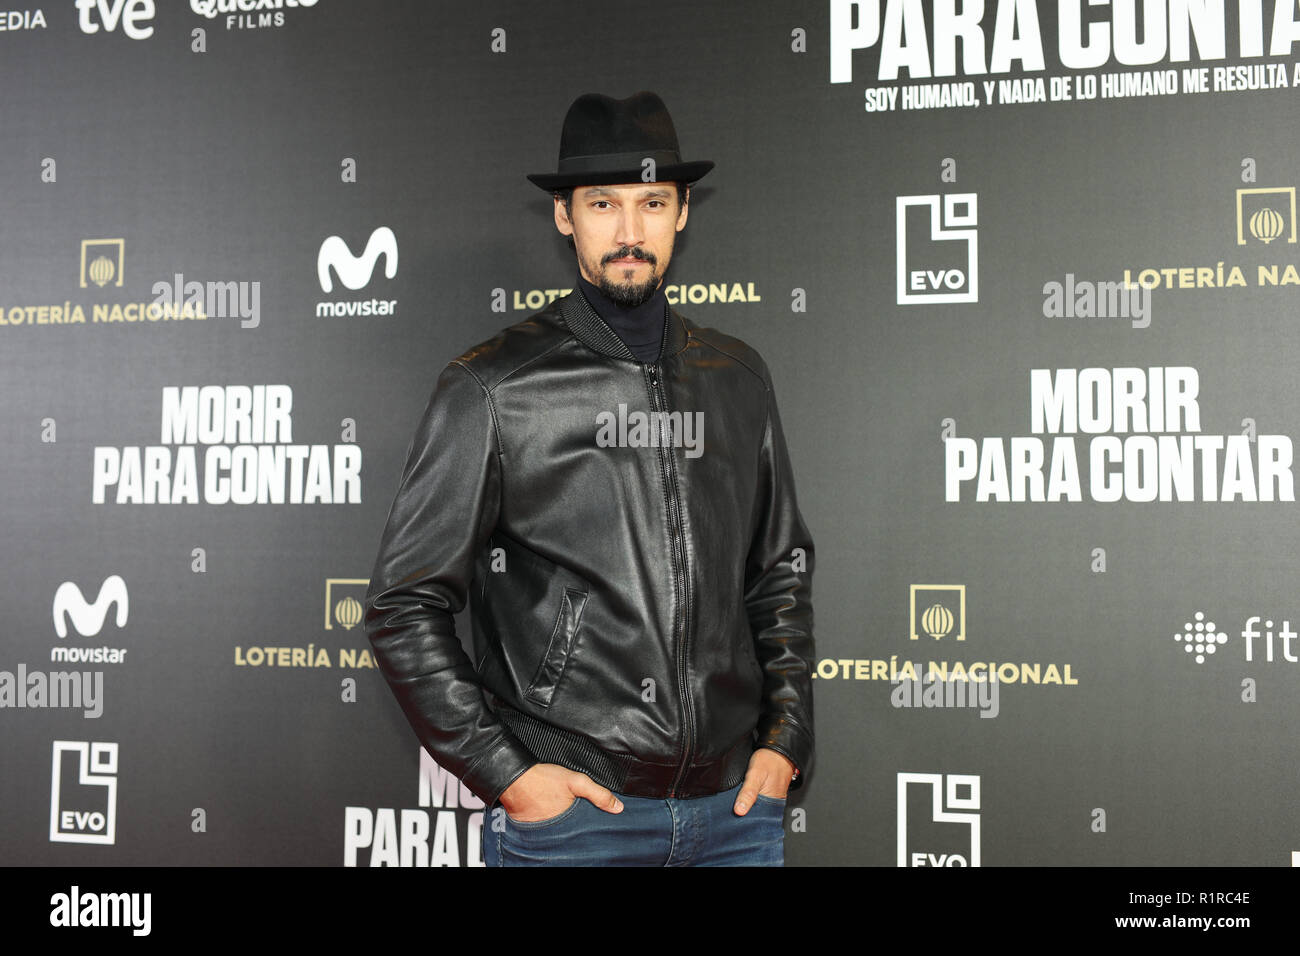 Madrid, Spain. 13th Nov, 2018. STANY COPPET, actor and presenter. The premiere of the Official Section of the documentary MORIR PARA CONTAR at the Madrid Premiere Week. Hernán Zin, the director, interviews other journalists and asks them about their traumas, their losses, their fears and their families on Nov 13, 2018 in Madrid, Spain Credit: Jesús Hellin/Alamy Live News Stock Photo